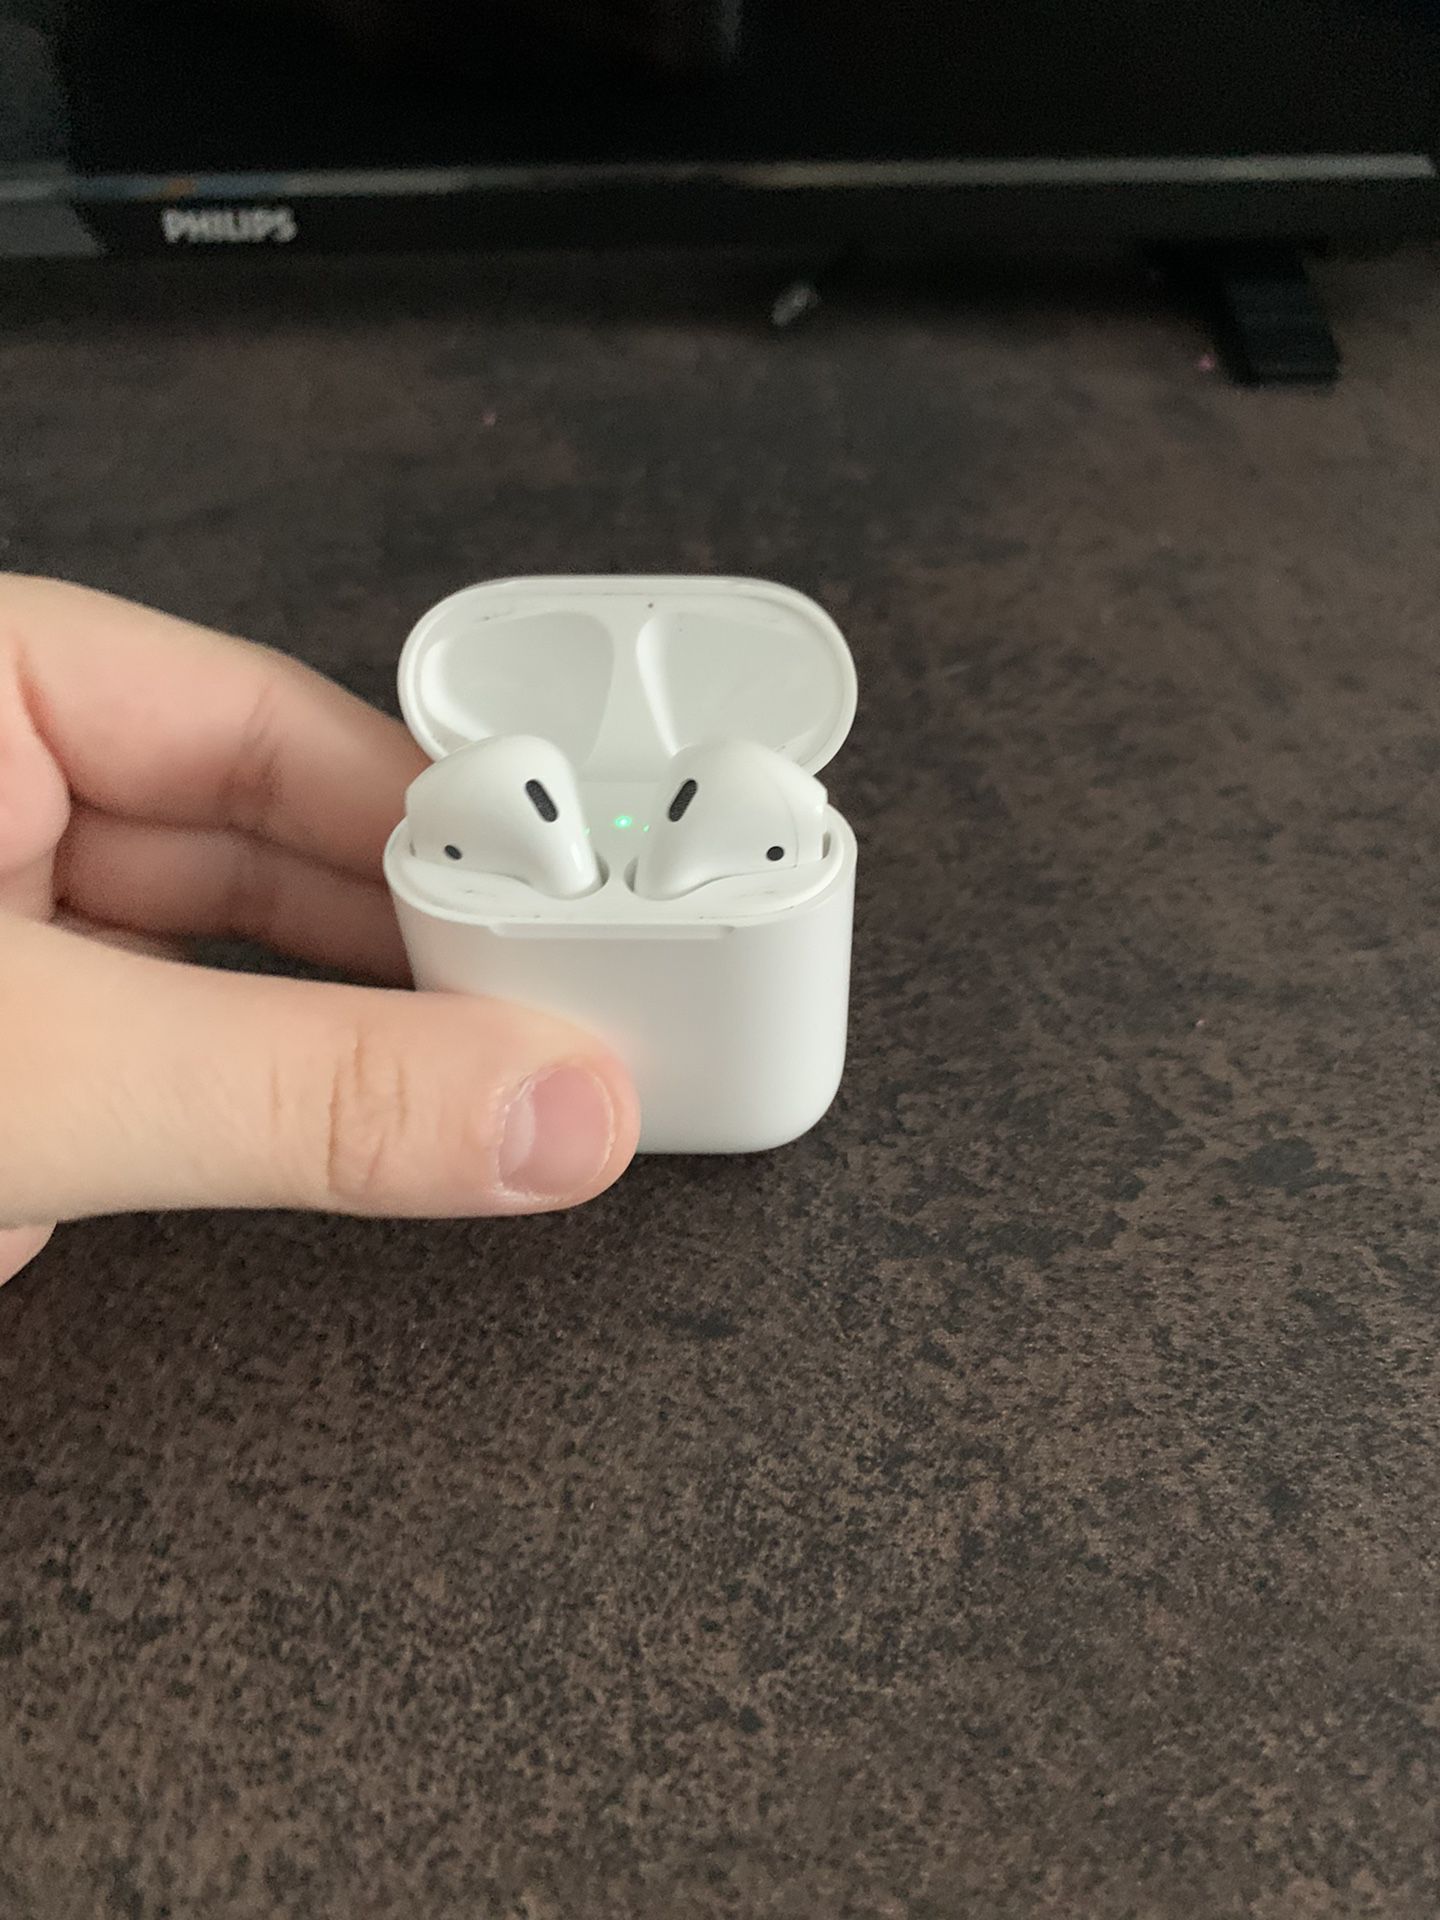 Apple AirPods 1st generation work like new